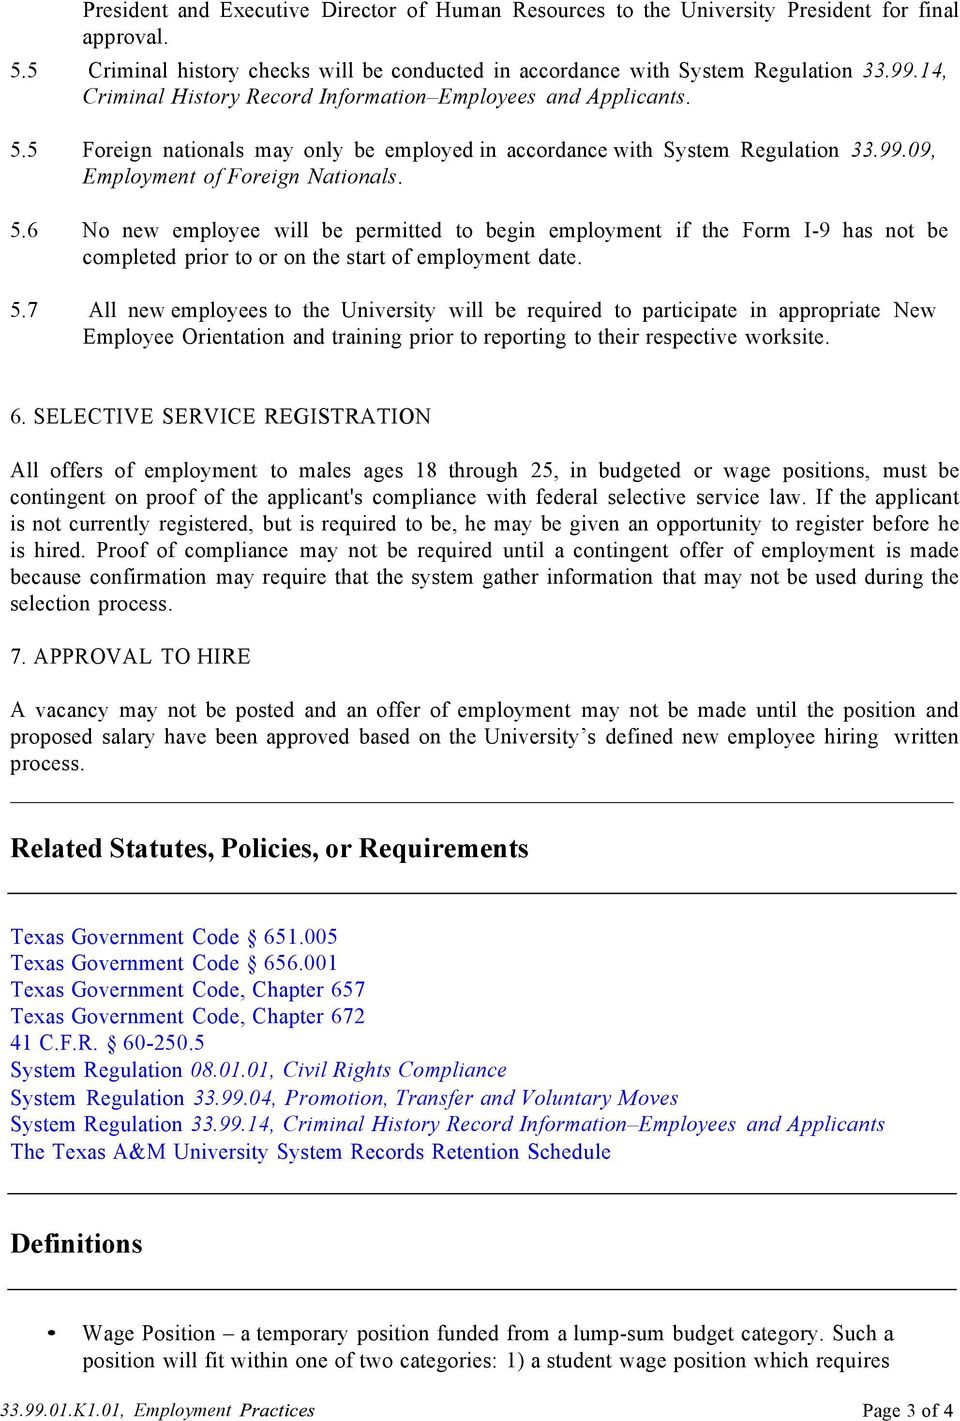 5 Foreign nationals may only be employed in accordance with System Regulation 33.99.09, Employment of Foreign Nationals. 5.